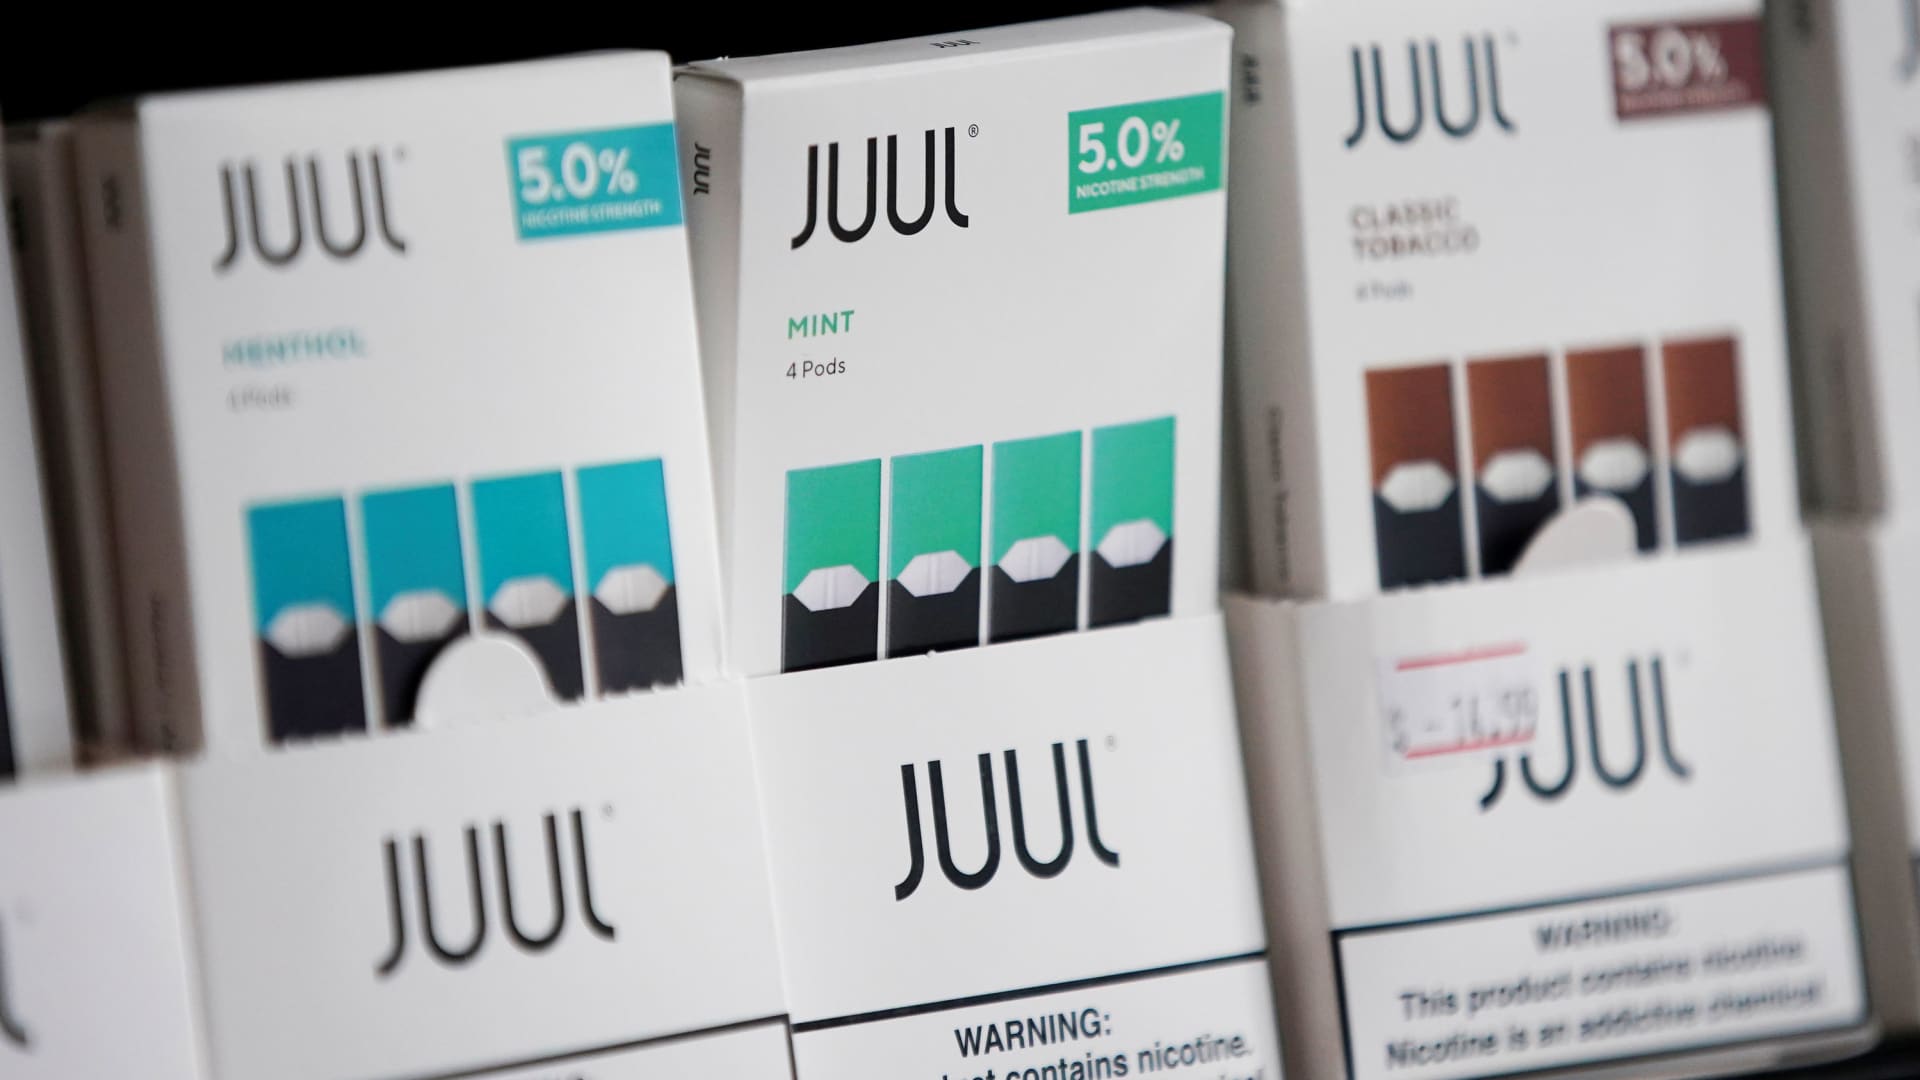 Juul to pay $462 million to settle youth vaping claims from six states, D.C.